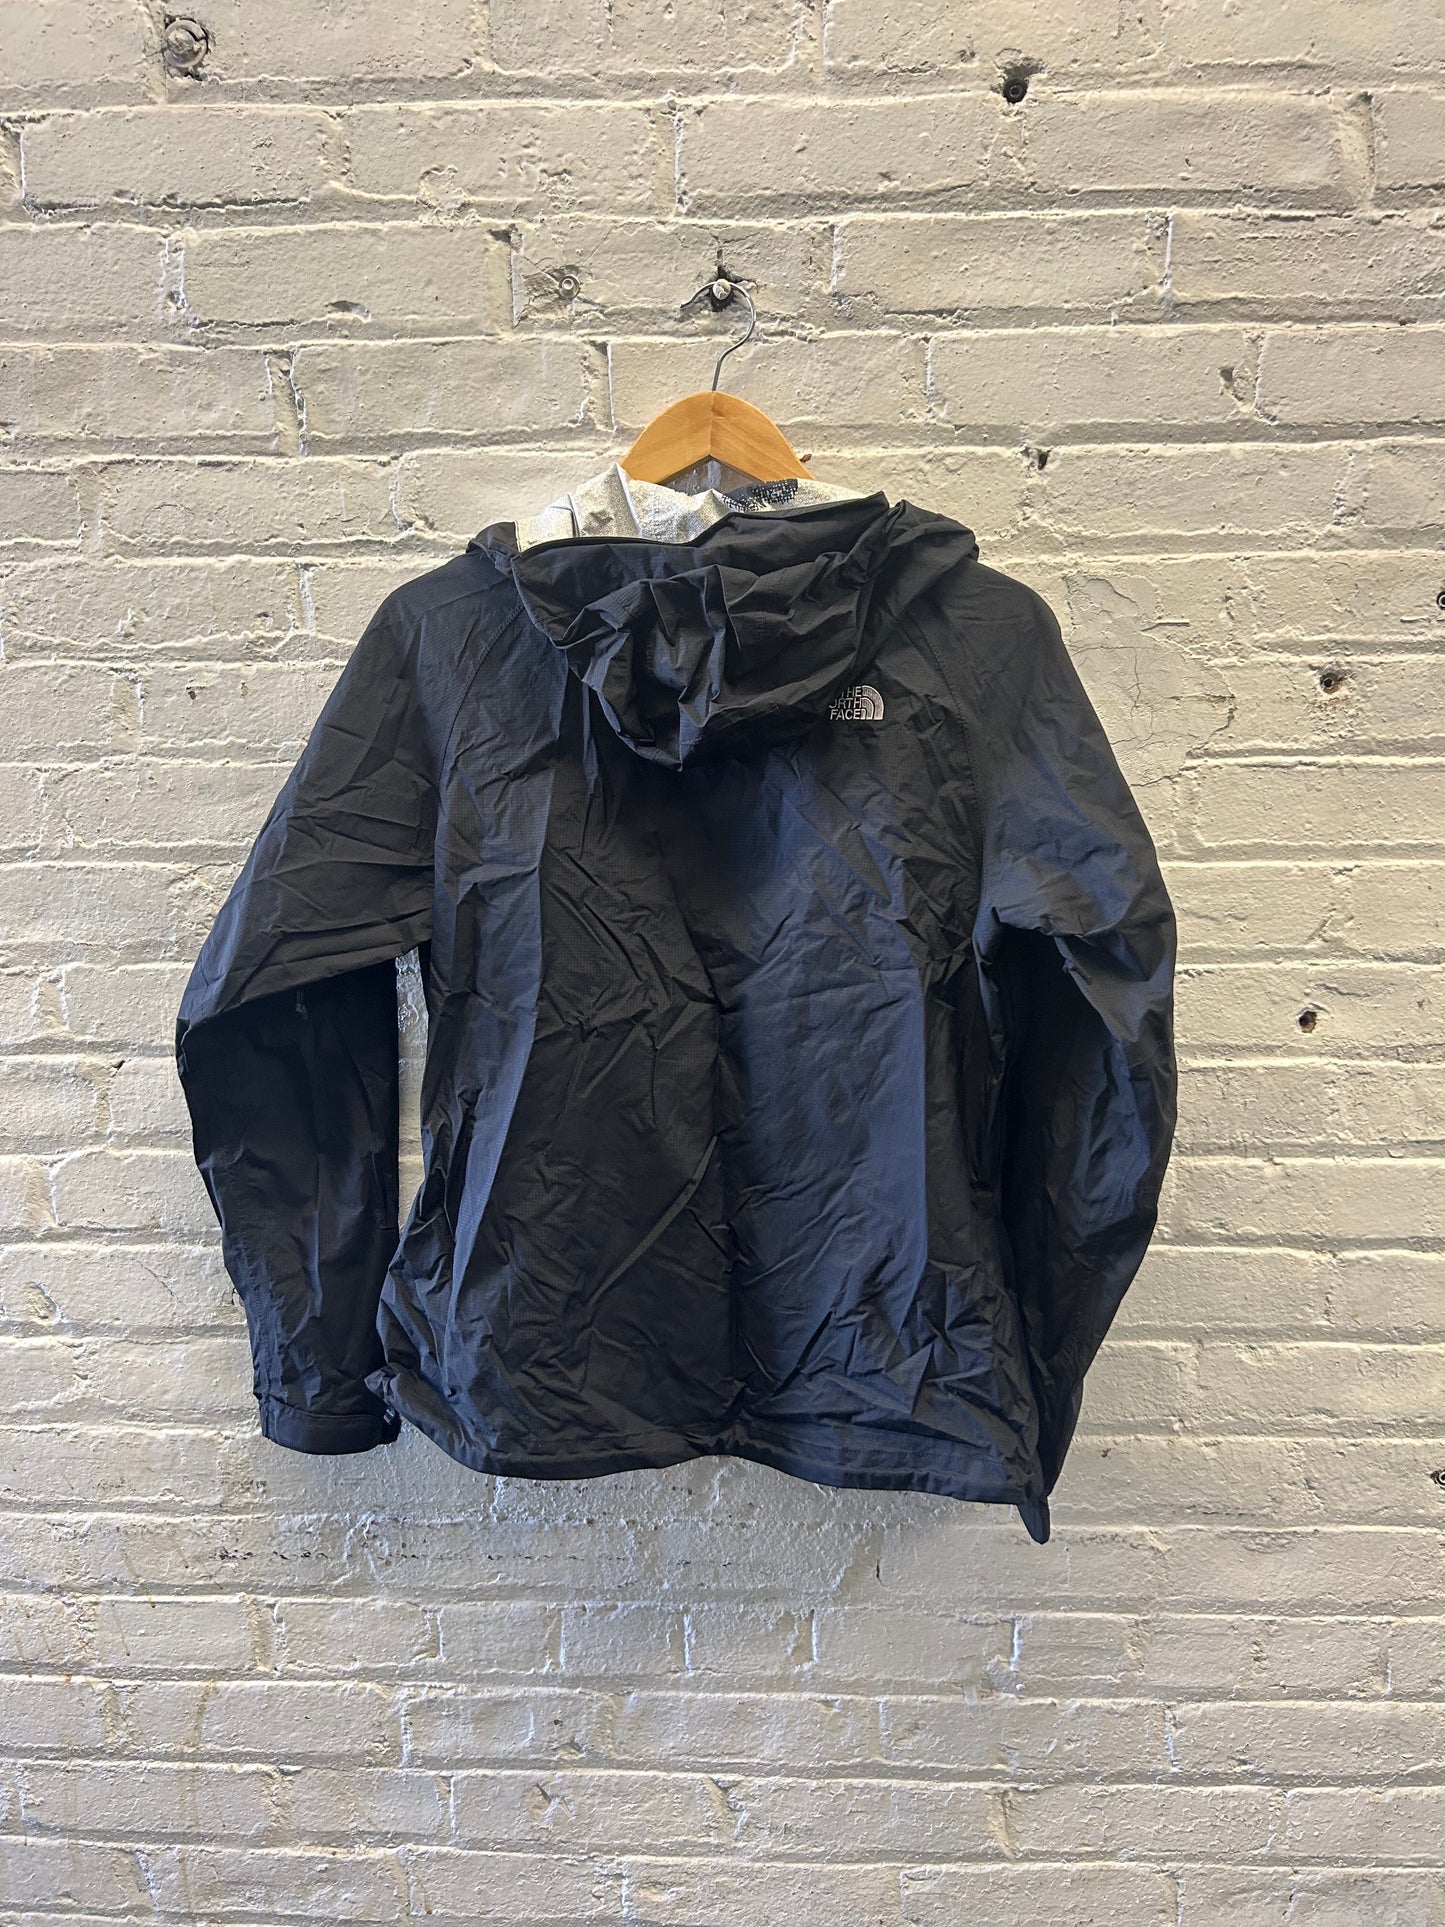 The North Face Hyvent Jacket - XS/Small